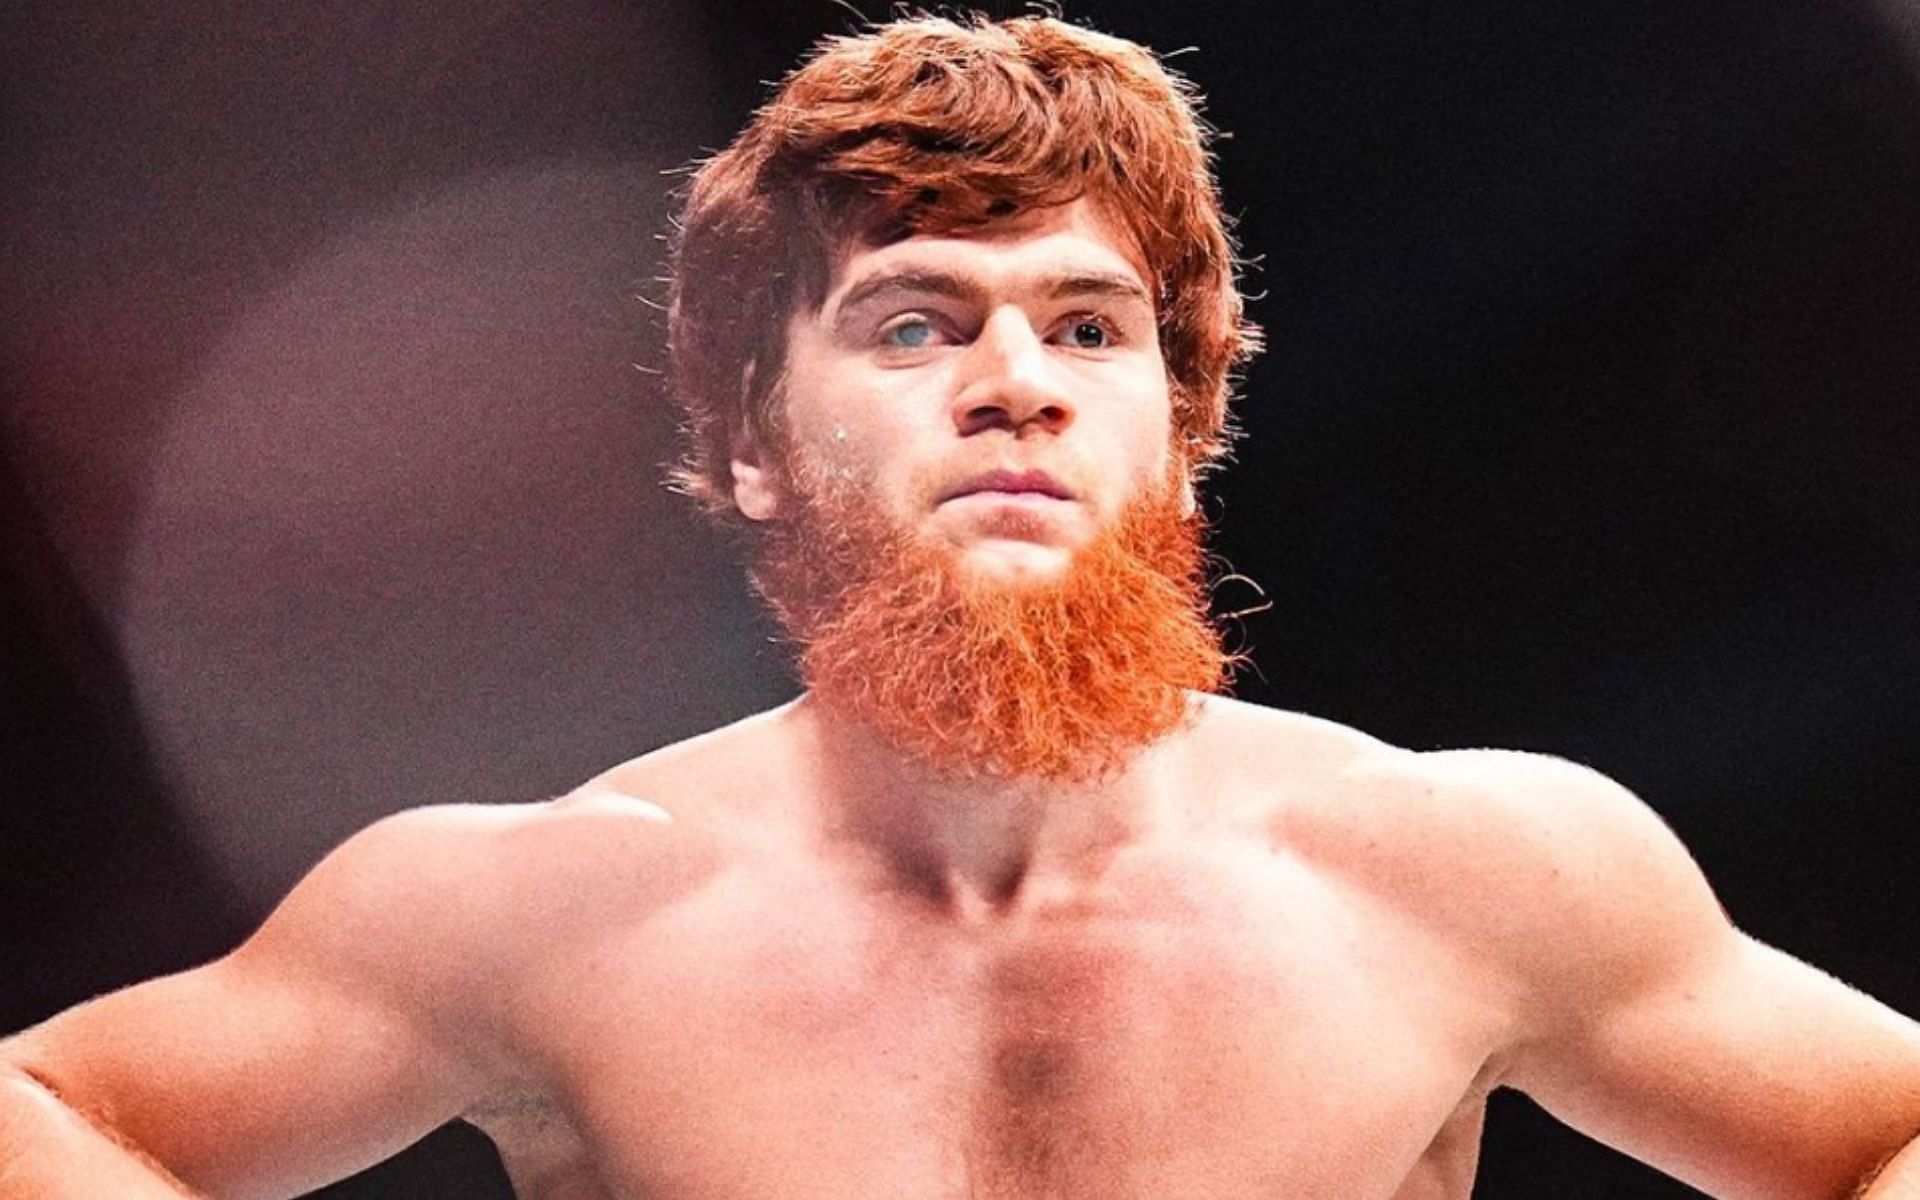 Joilton Lutterbach was supposed to fight Shara Magomedov (pictured) at UFC Saudi Arabia. [Image courtesy: @espnmma on Instagram]